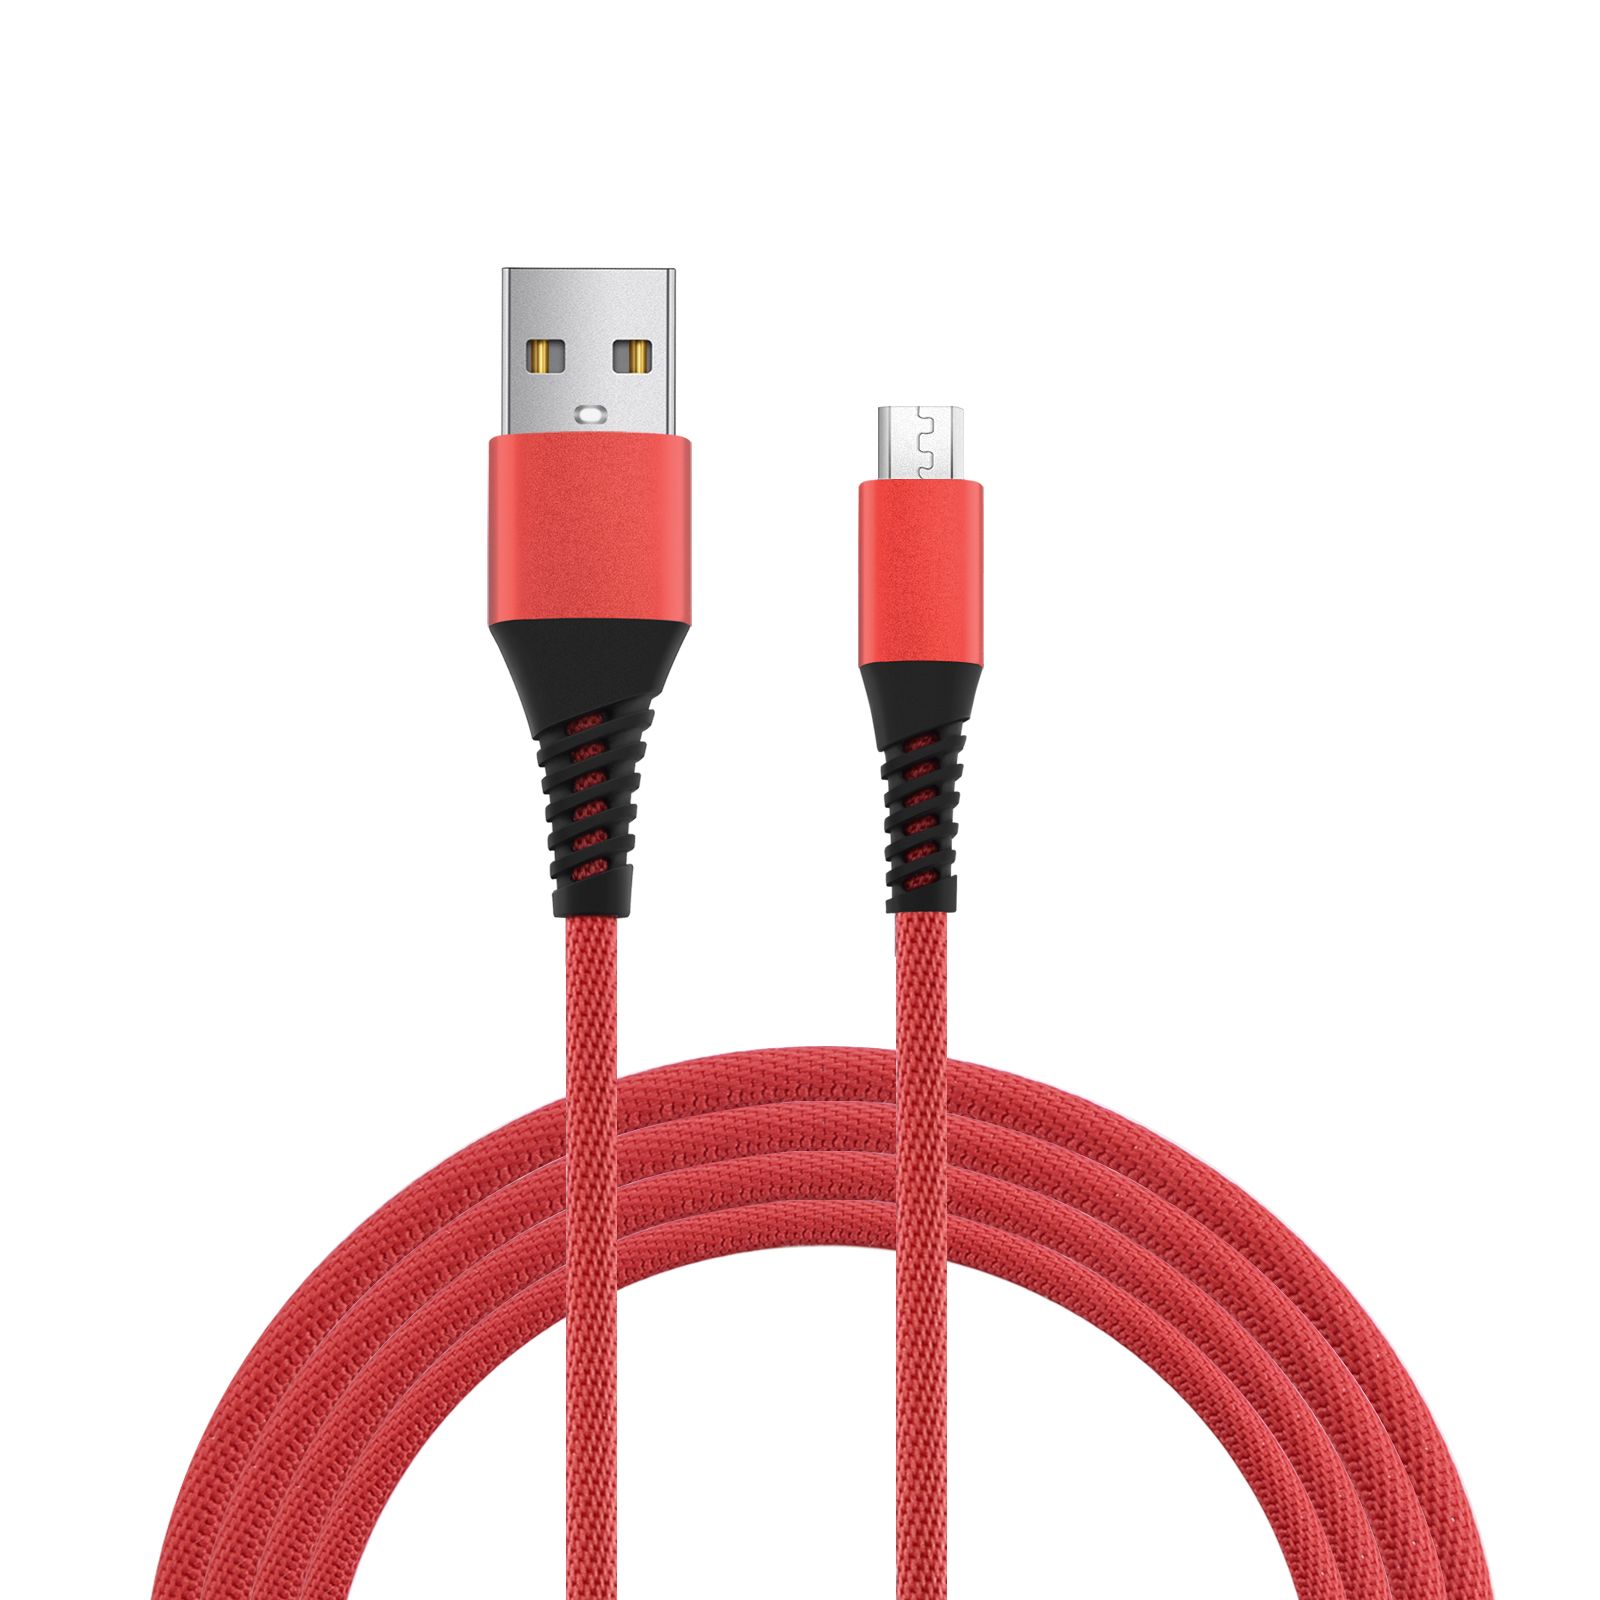 Bakeey-Hi-Tensile-Micro-USB-Cable-Braided-Charging-Data-Cable-1M-For-5-Plus-Note-5-4X-1312119